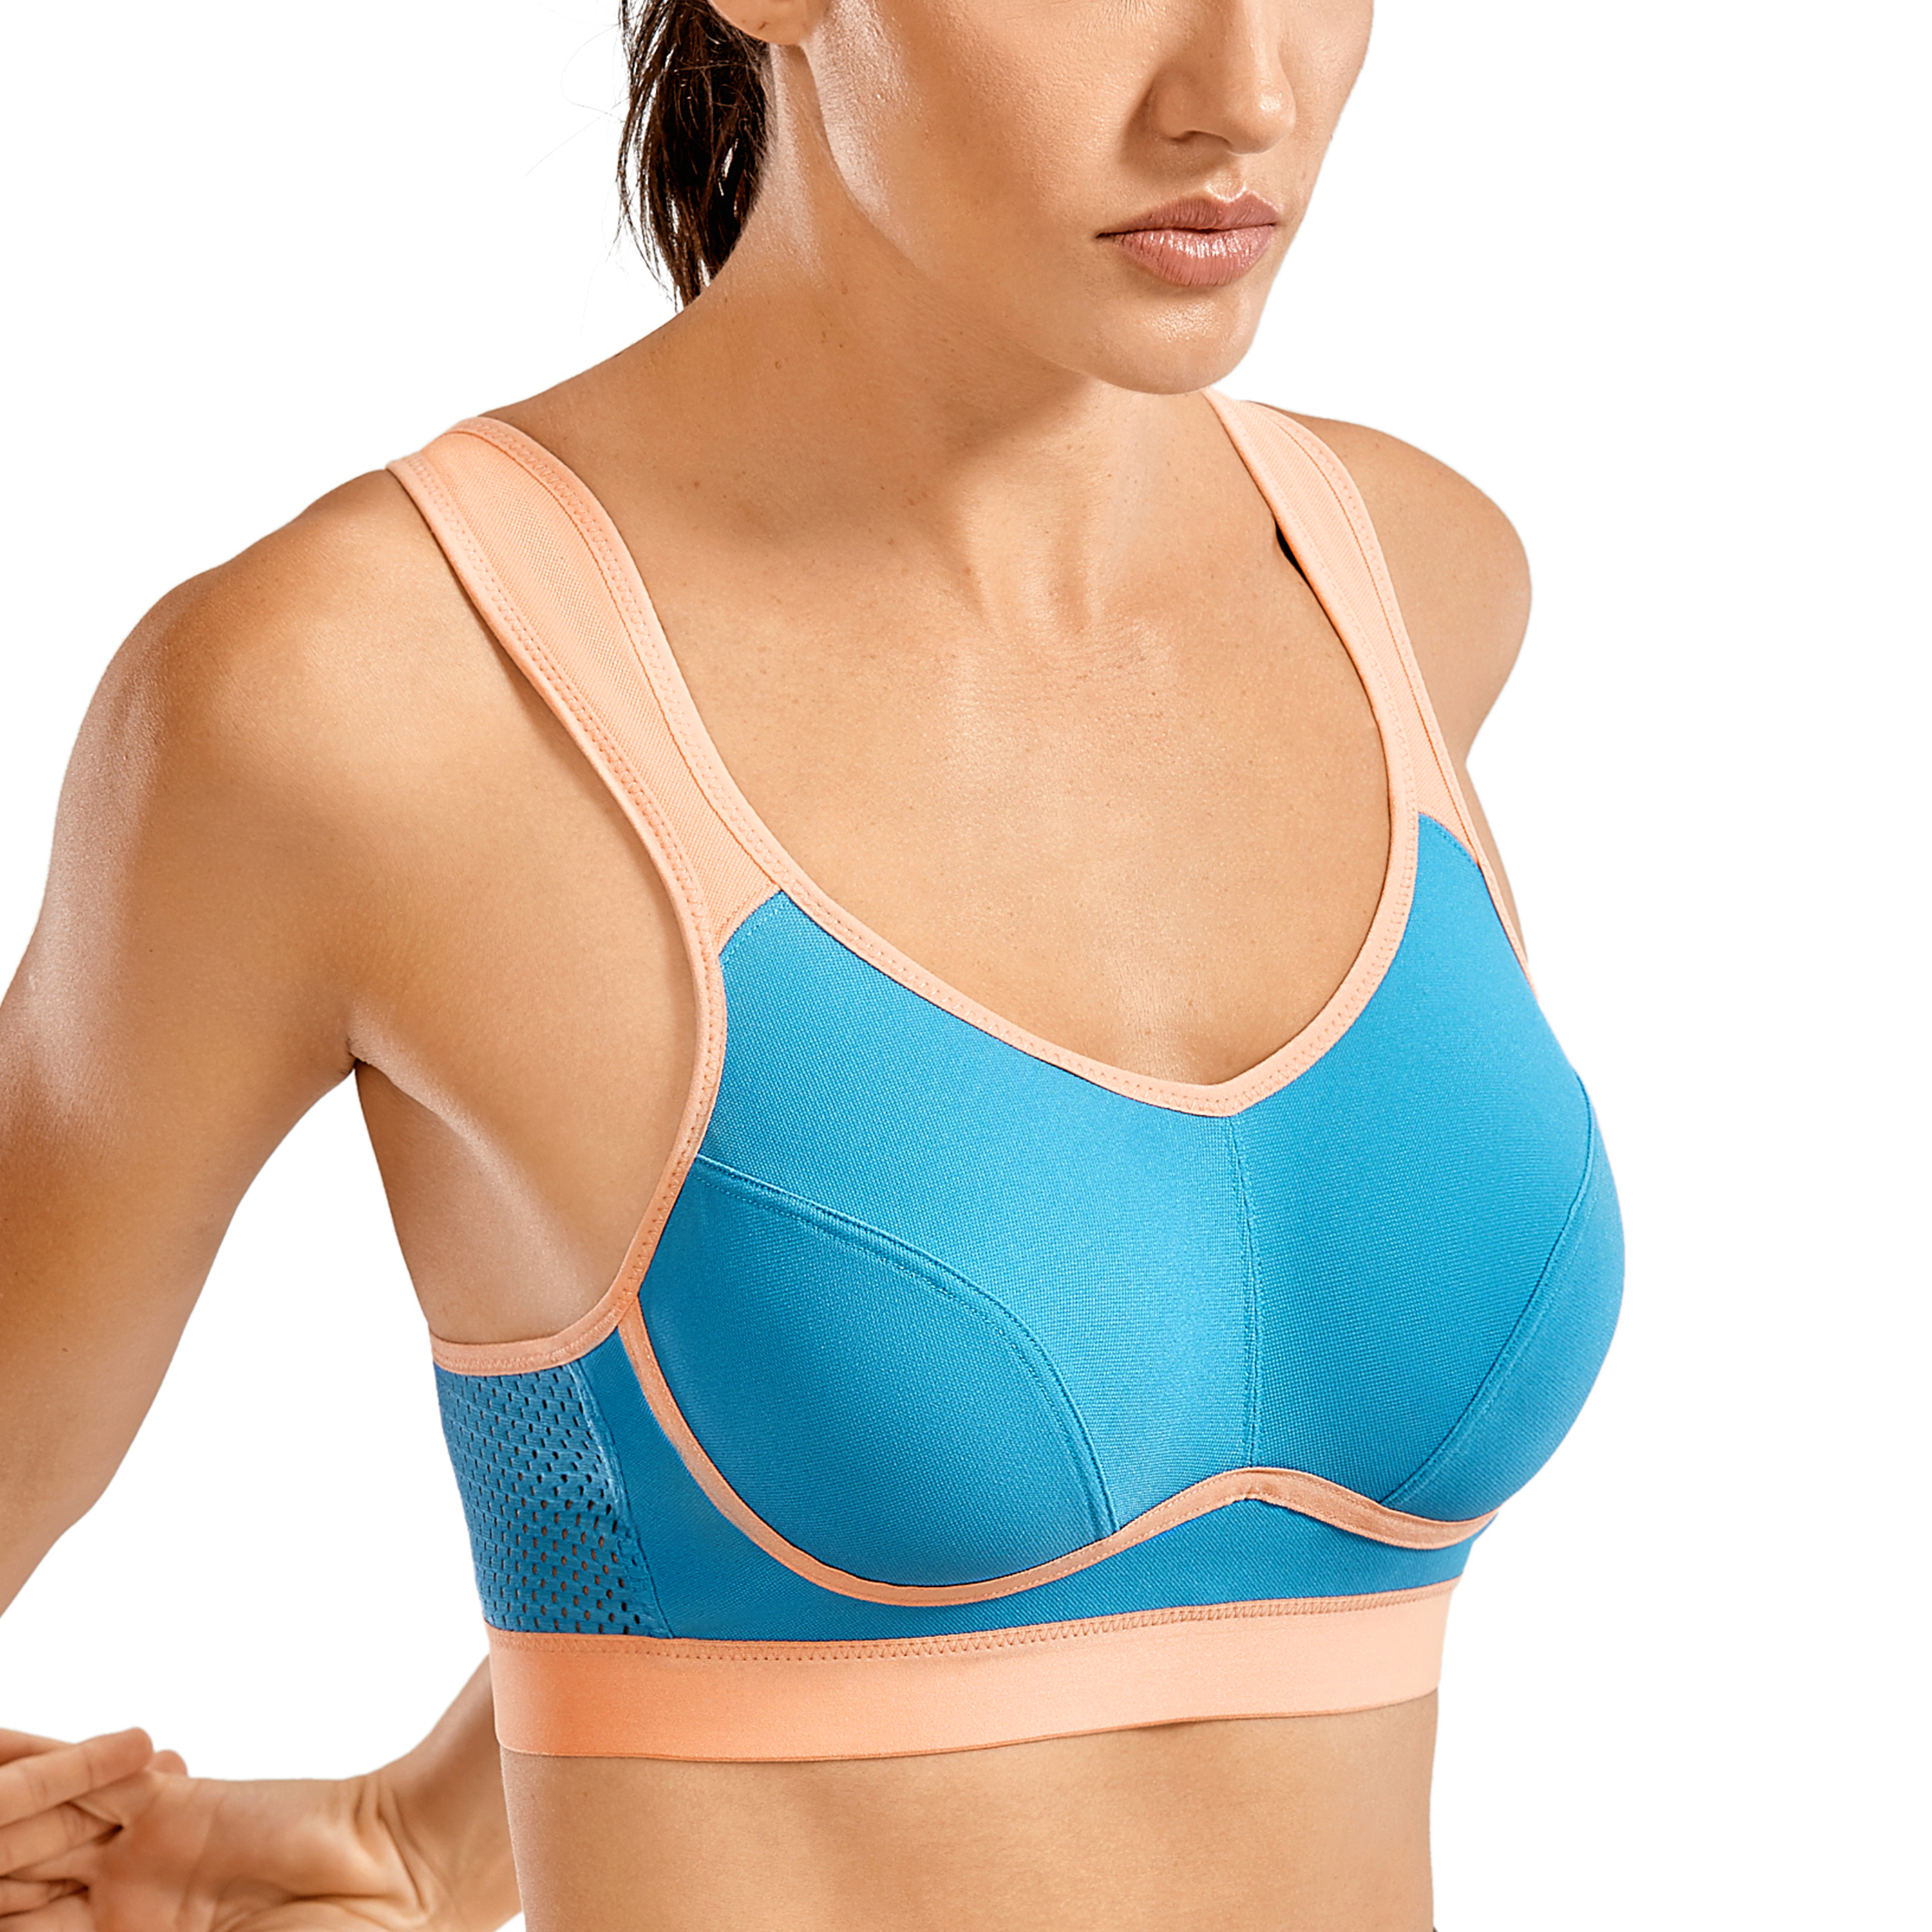 Women's Sports Bra High Impact Support Wirefree Plus Size Bounce